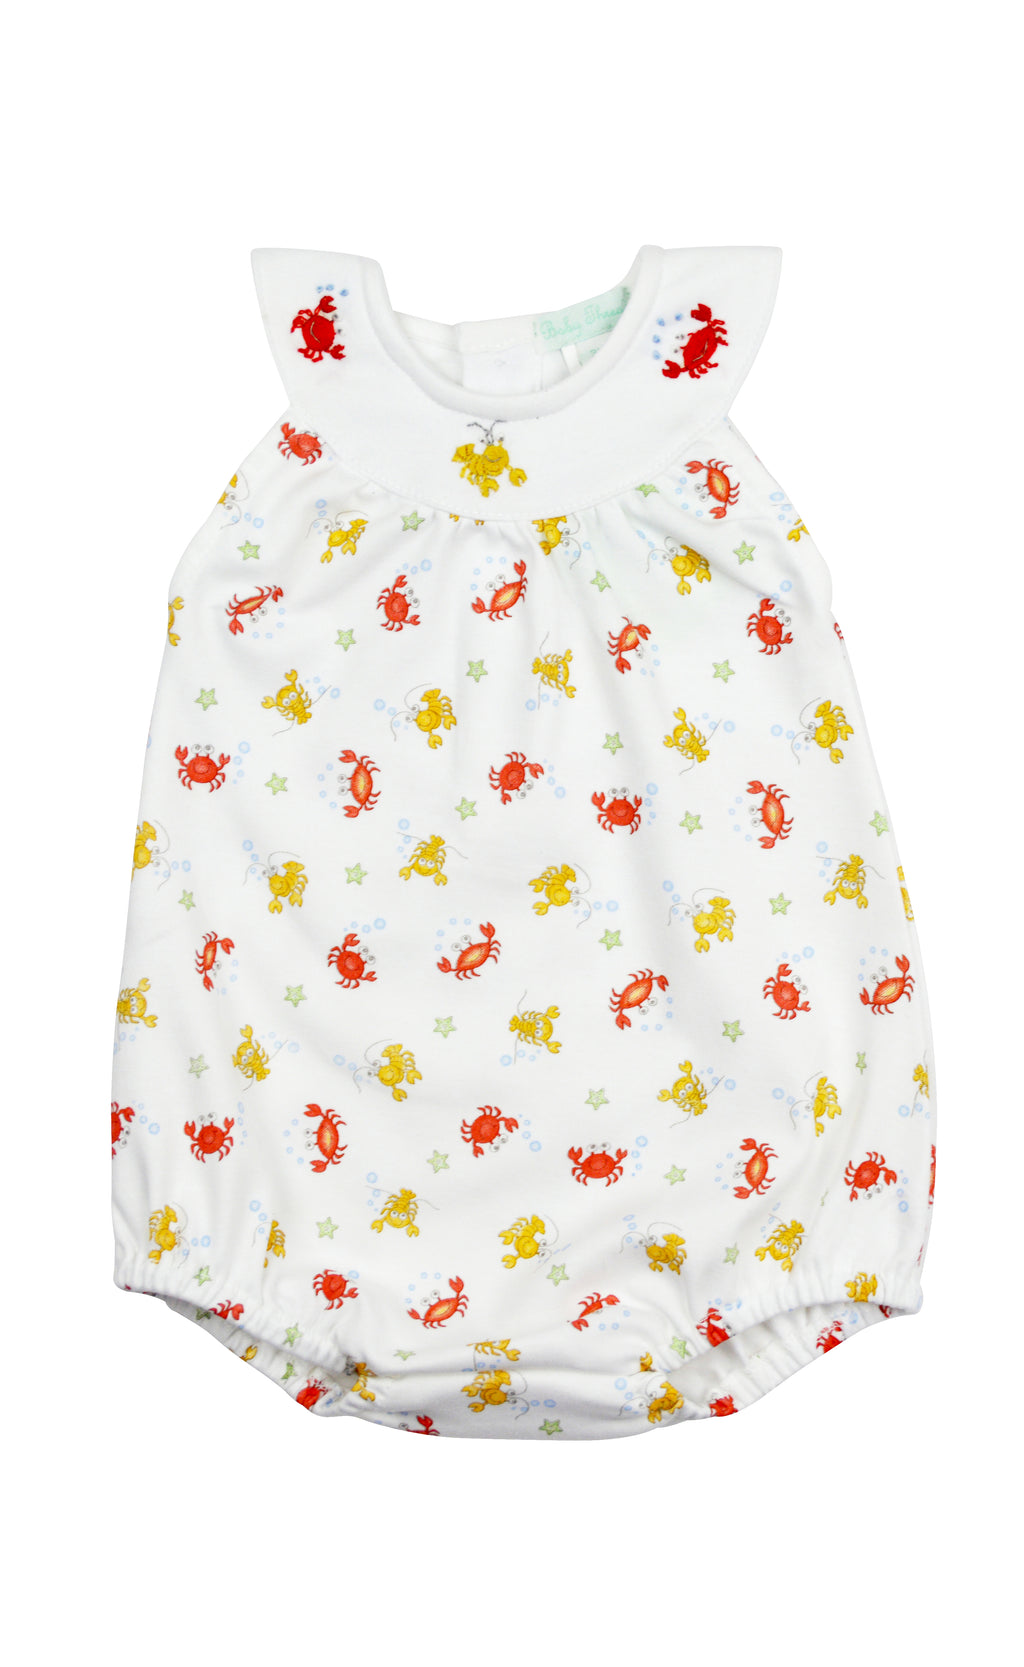 Lobster and Crabs Baby Boy Romper - Little Threads Inc. Children's Clothing